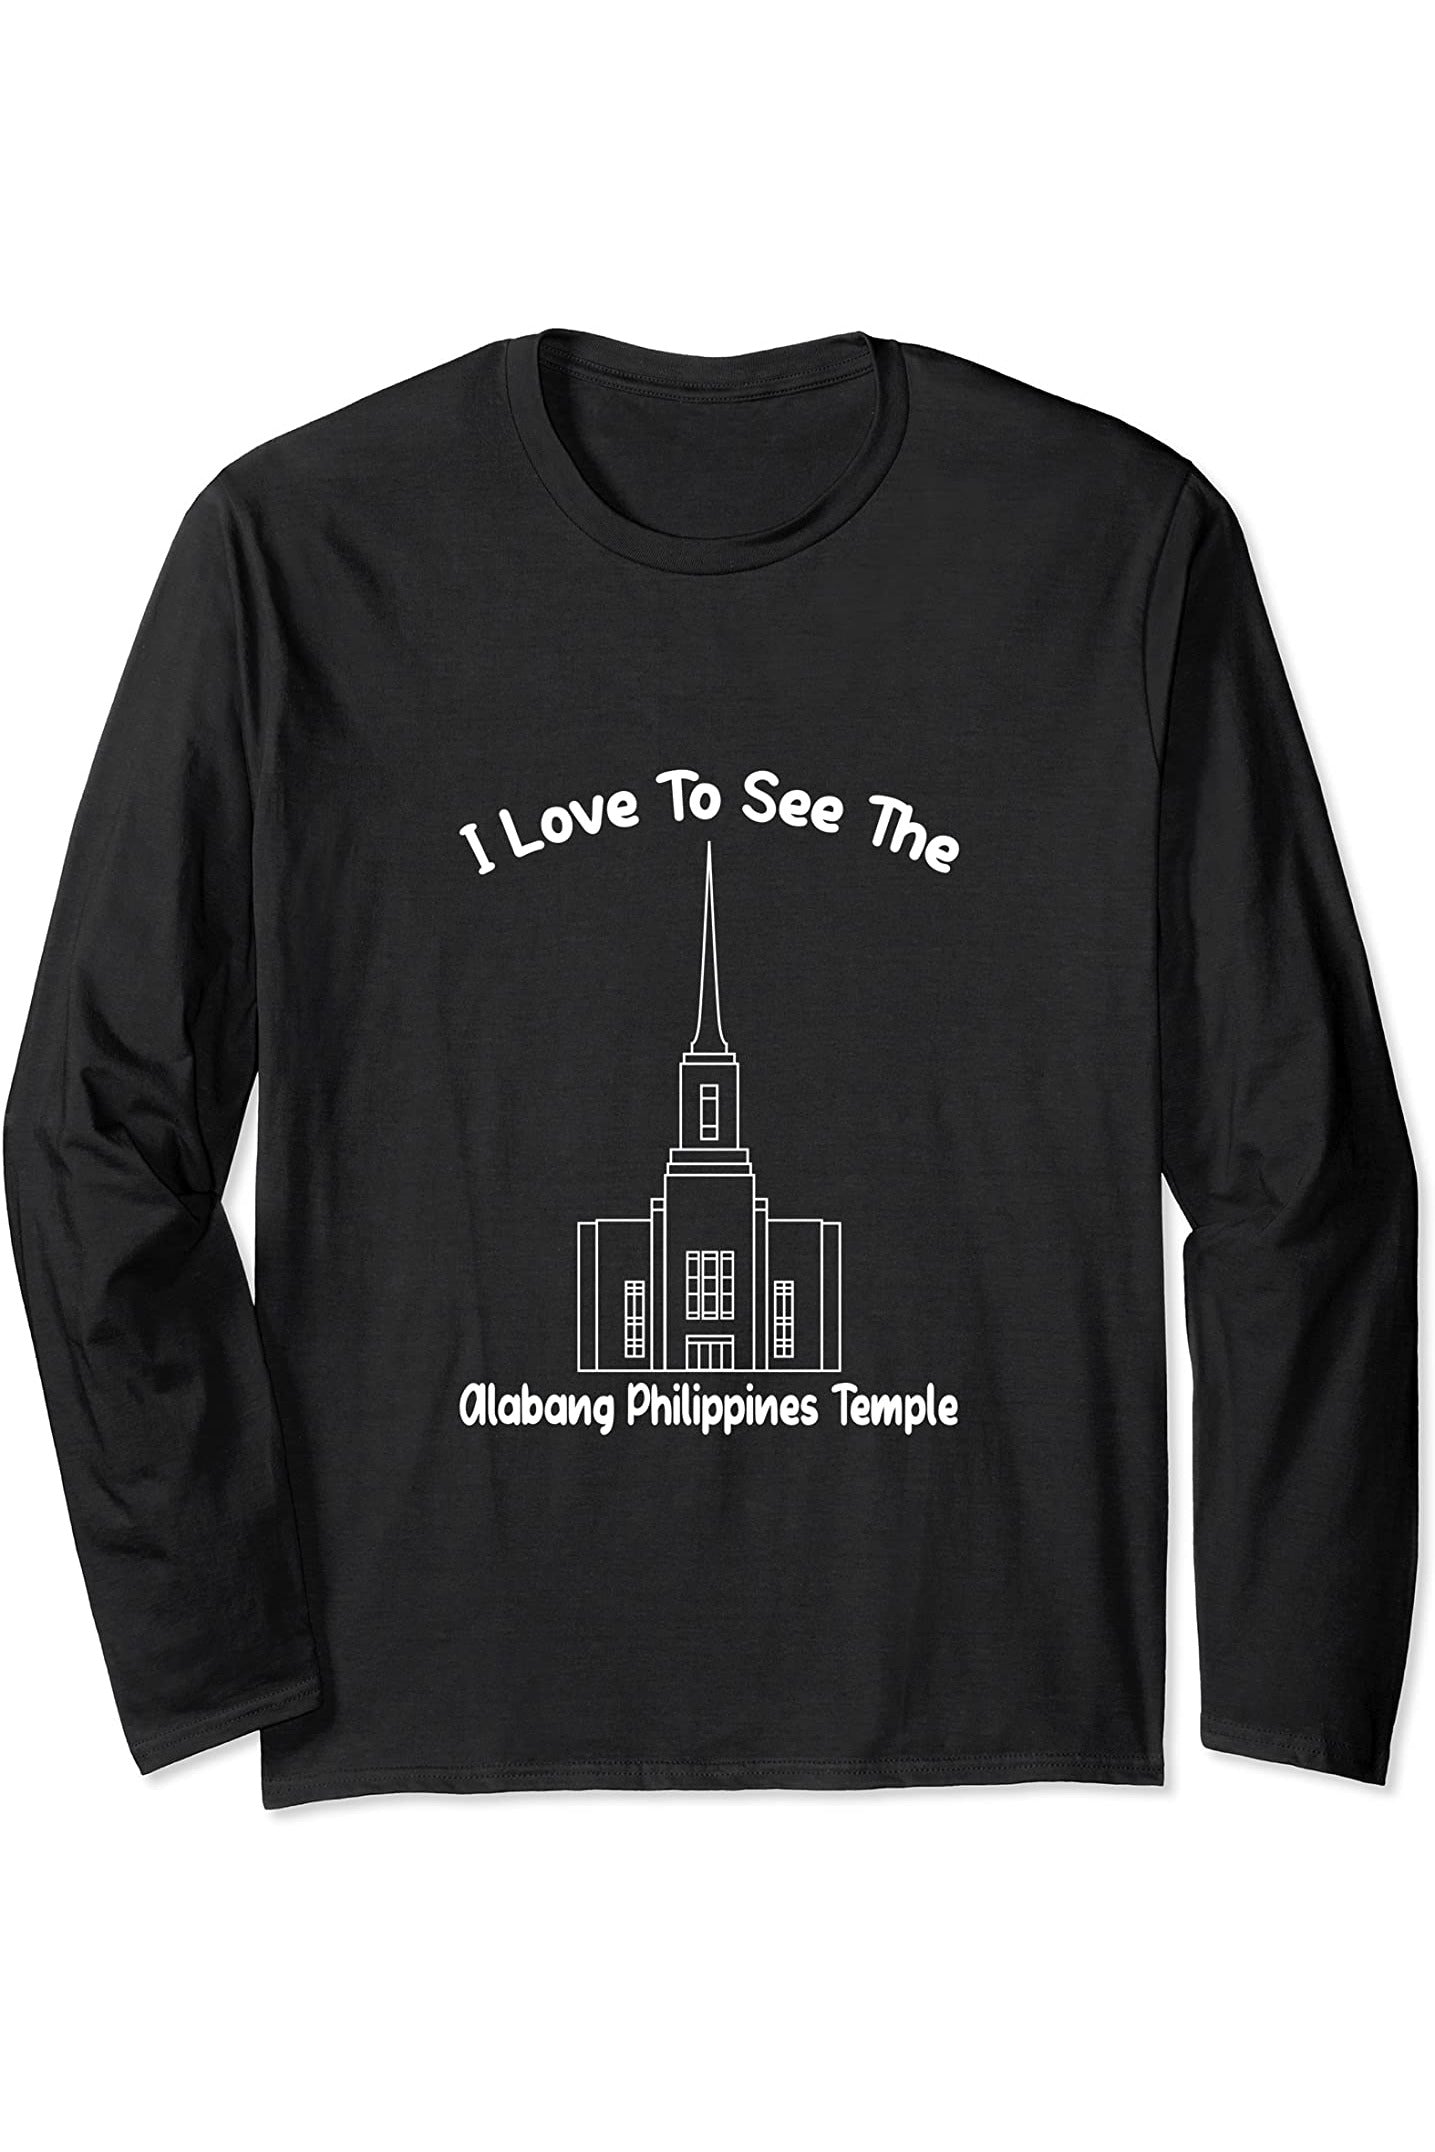 Alabang Philippines Temple Long Sleeve T-Shirt - Primary Style (English) US